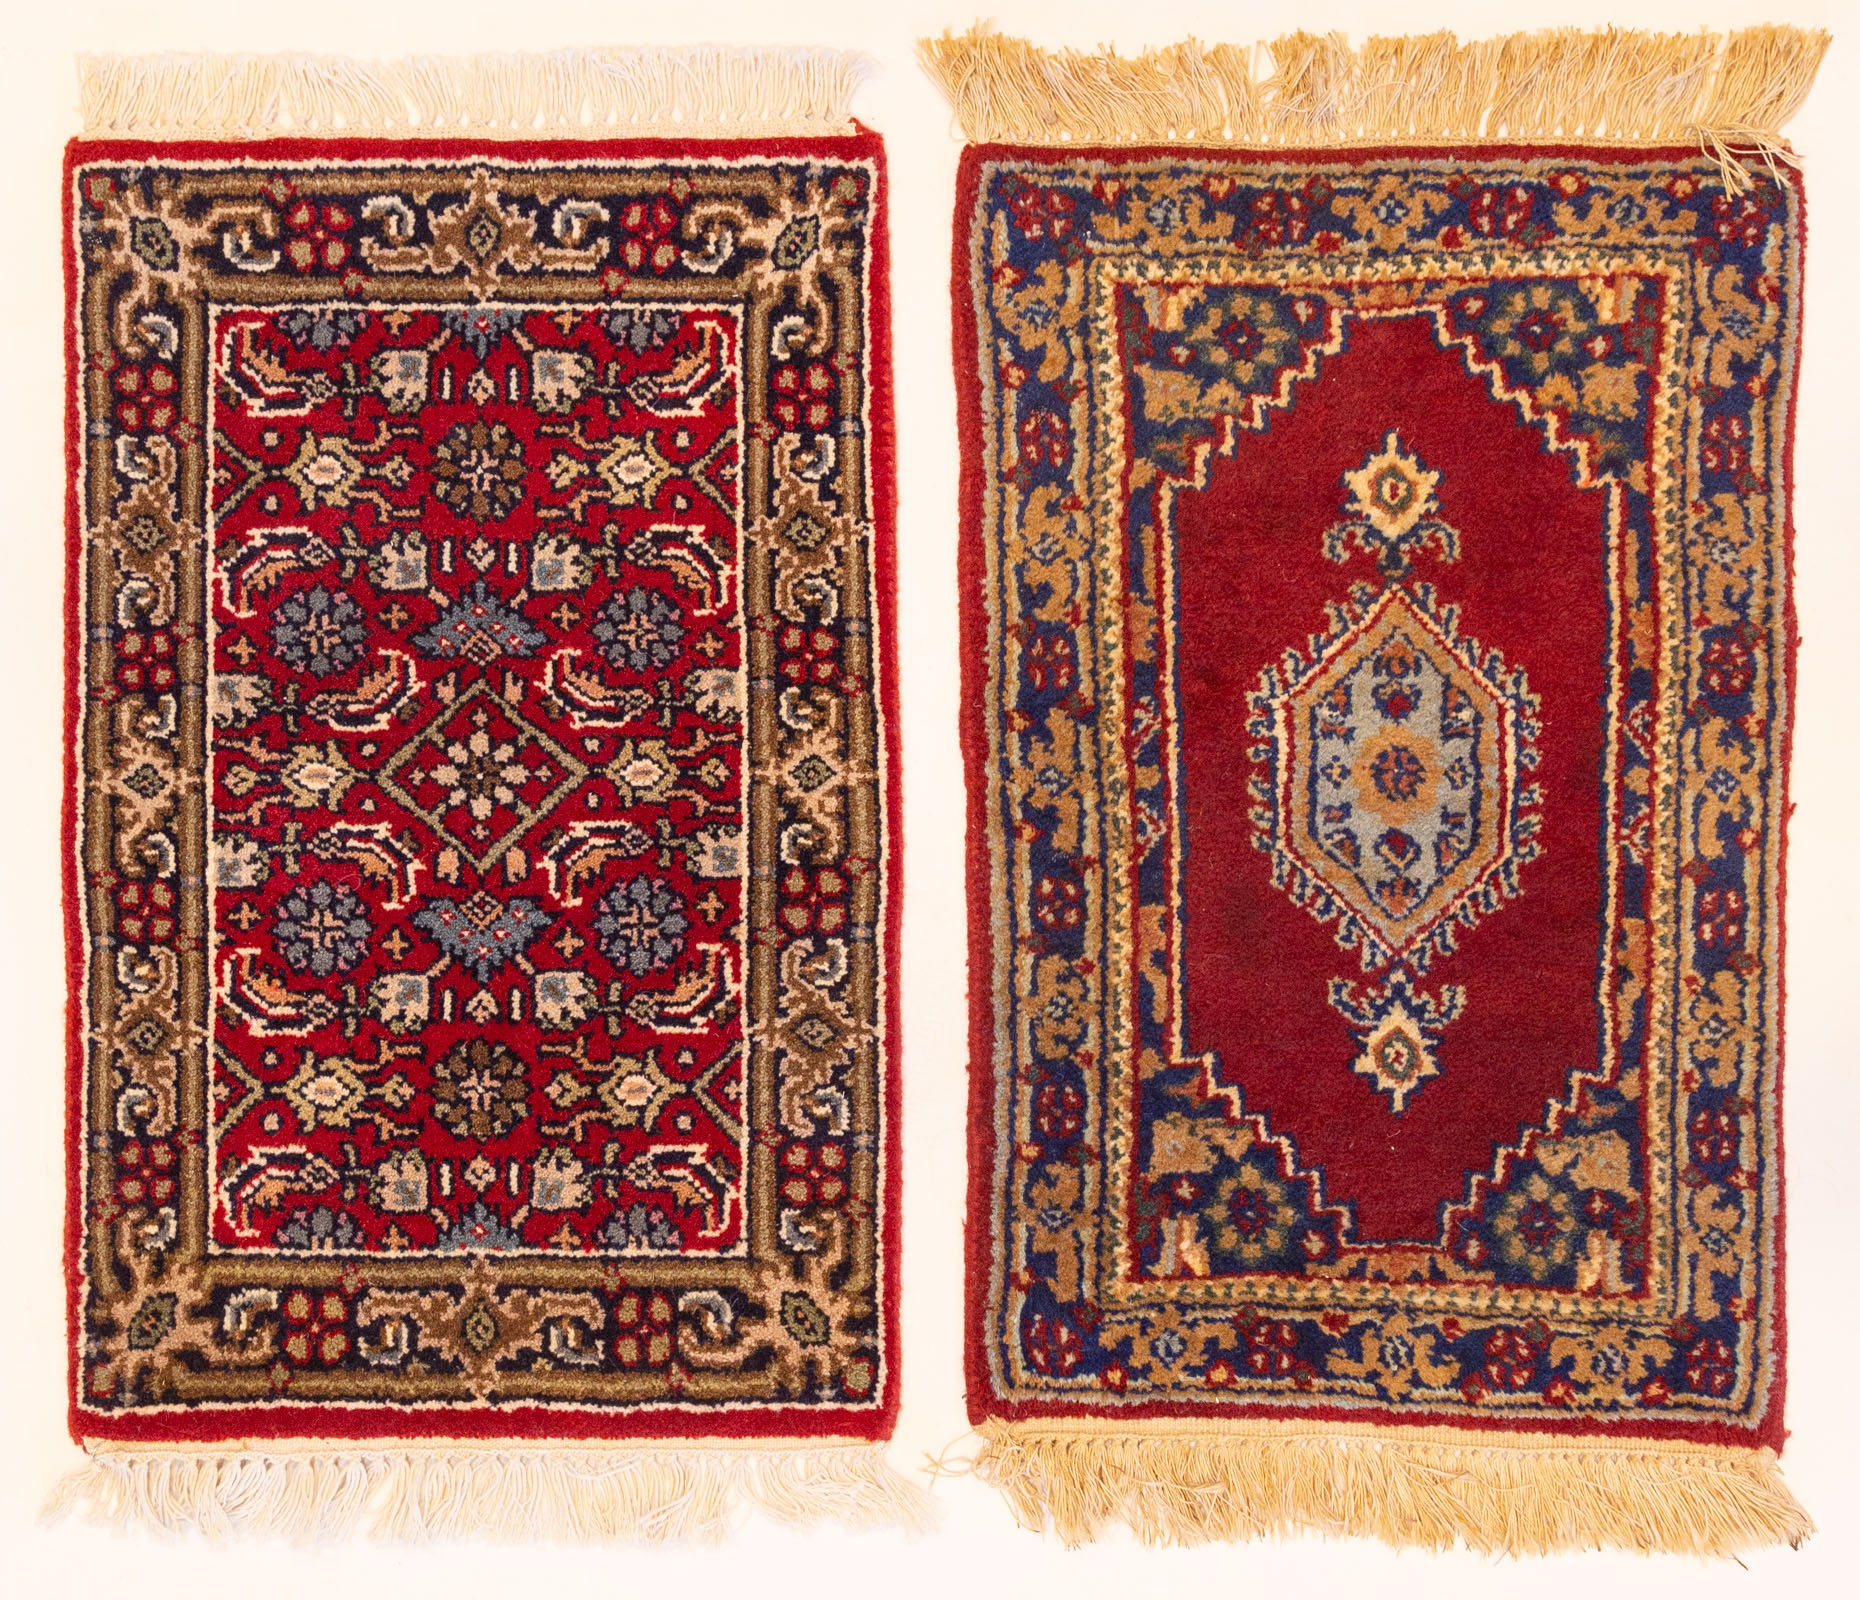 TWO PRAYER RUGS, PERSIA Fourth